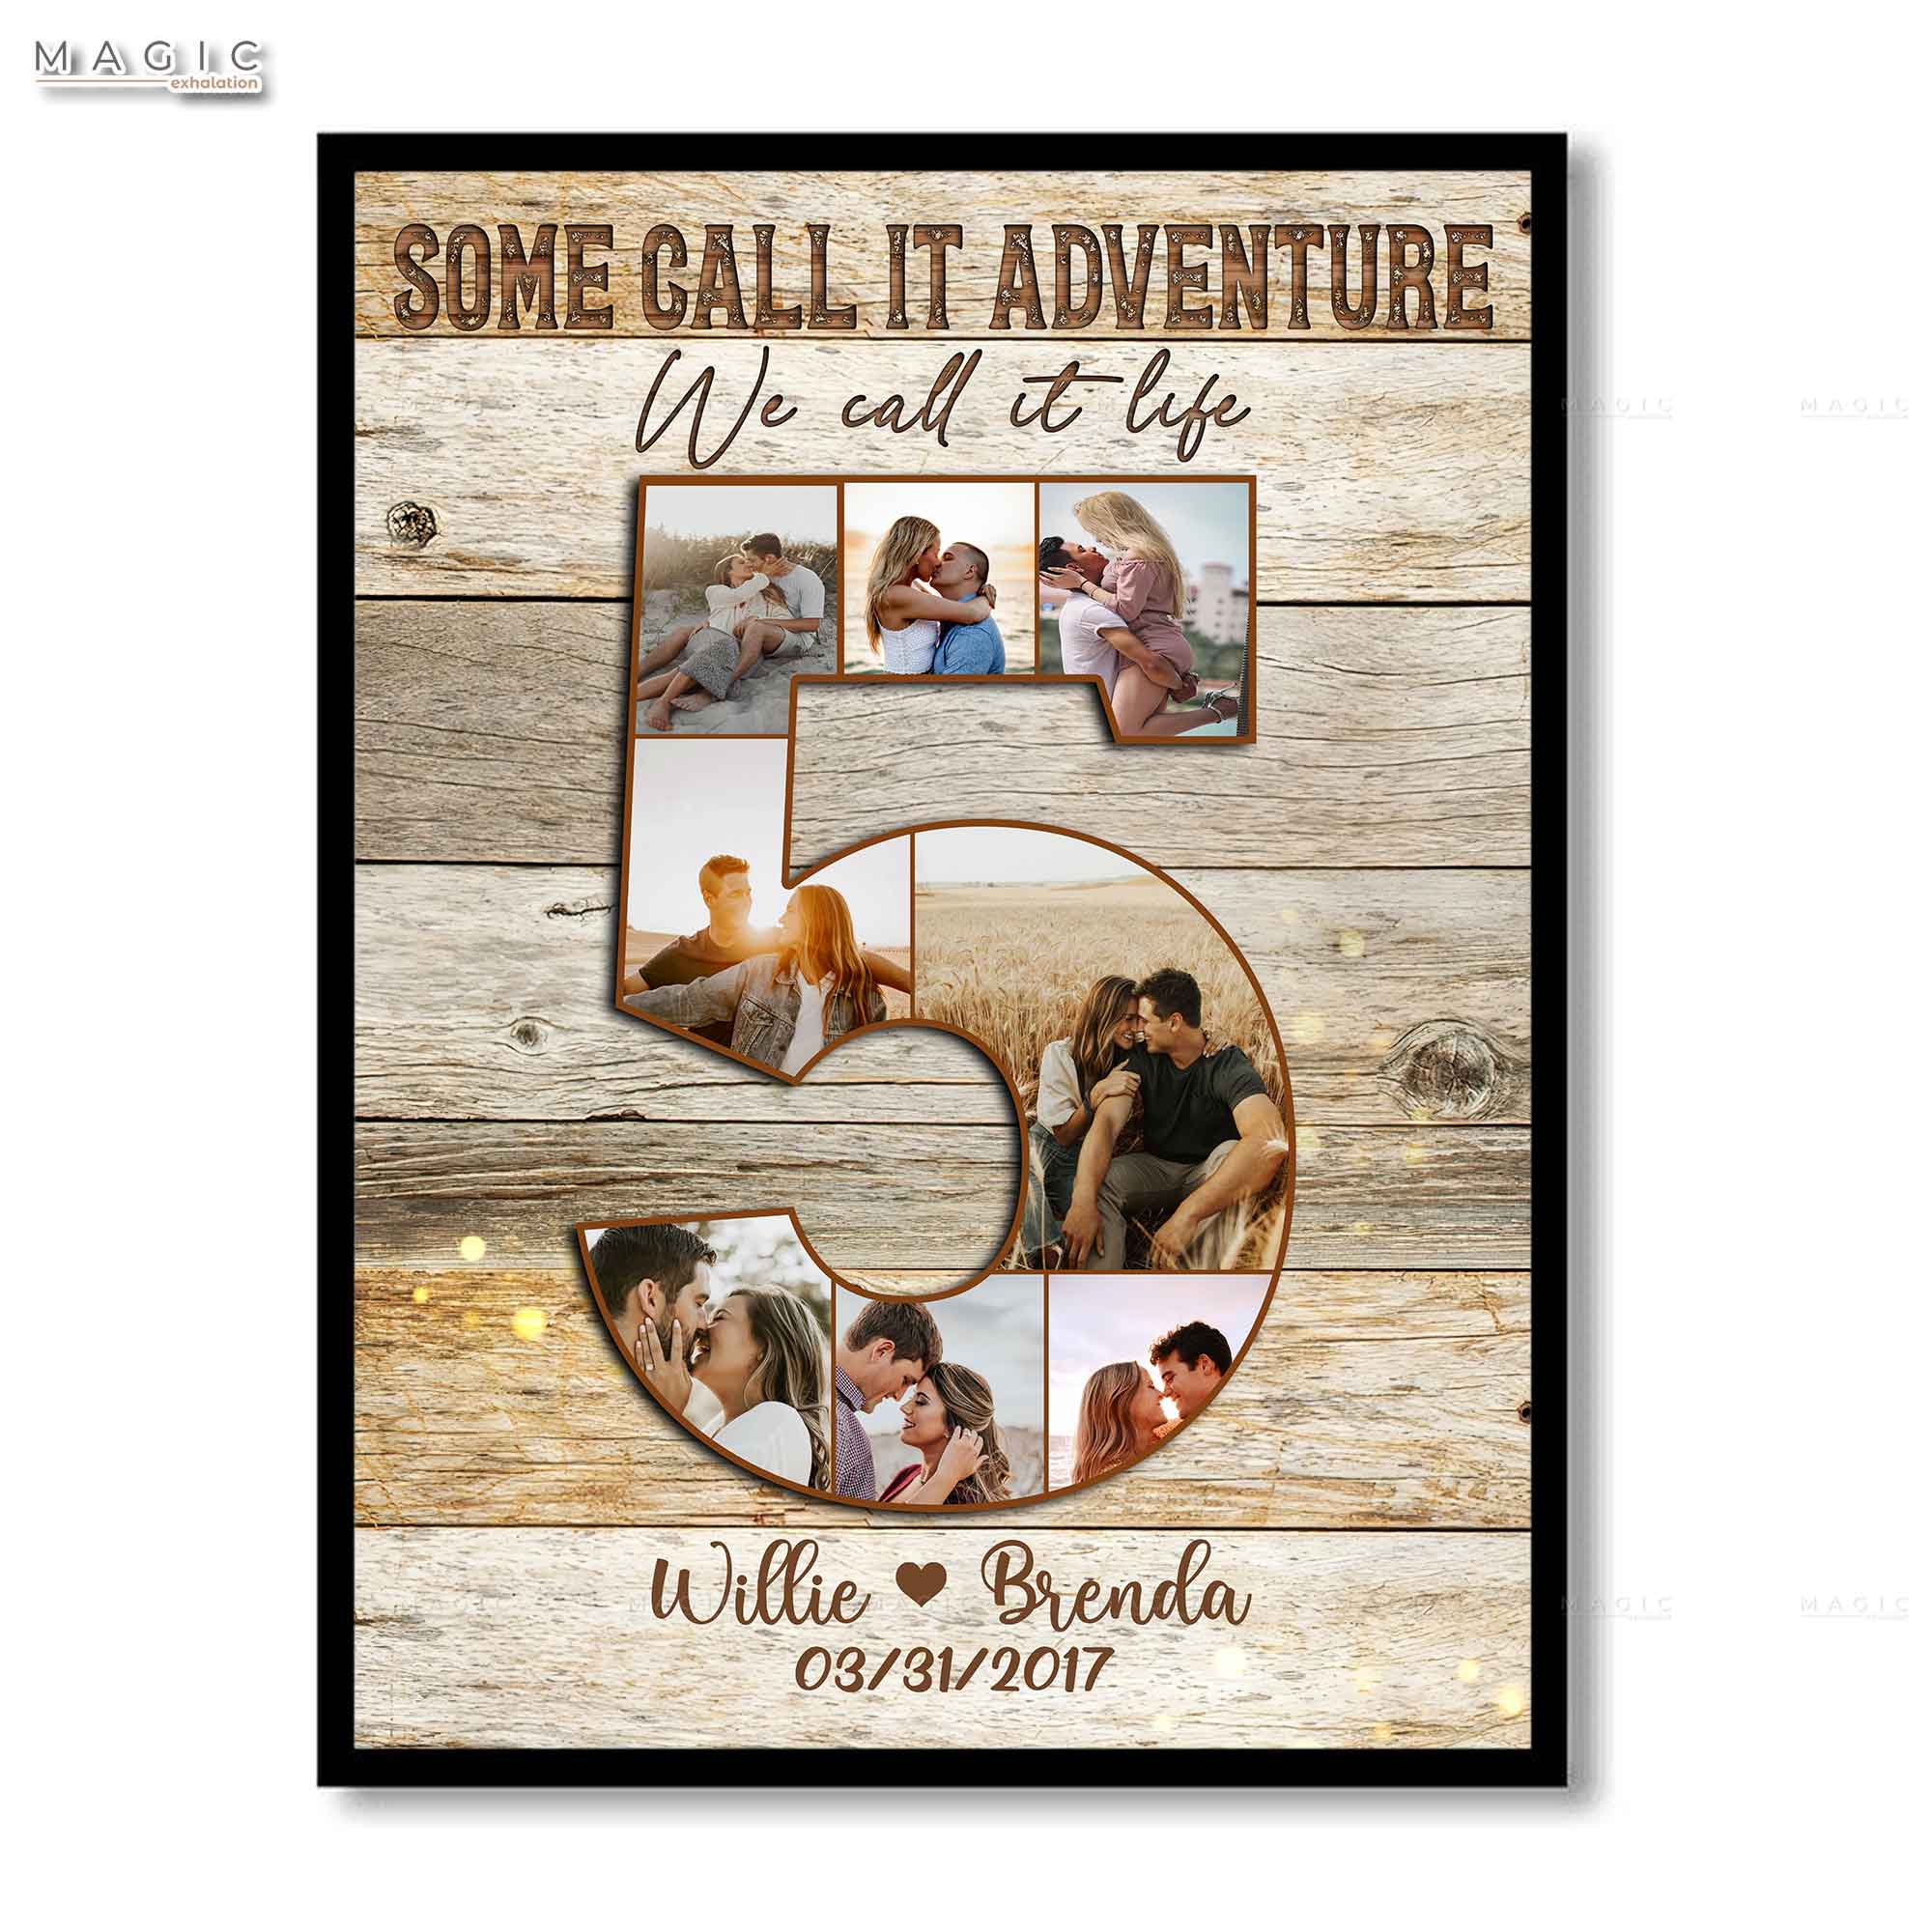 5 Year Wedding Anniversary Ideas, Picture Collage Gifts 5th Wedding Anniversary Gift for Him, Some Call It Adventure Great 5 Year Anniversary Gifts for Her Canvas Wall Art